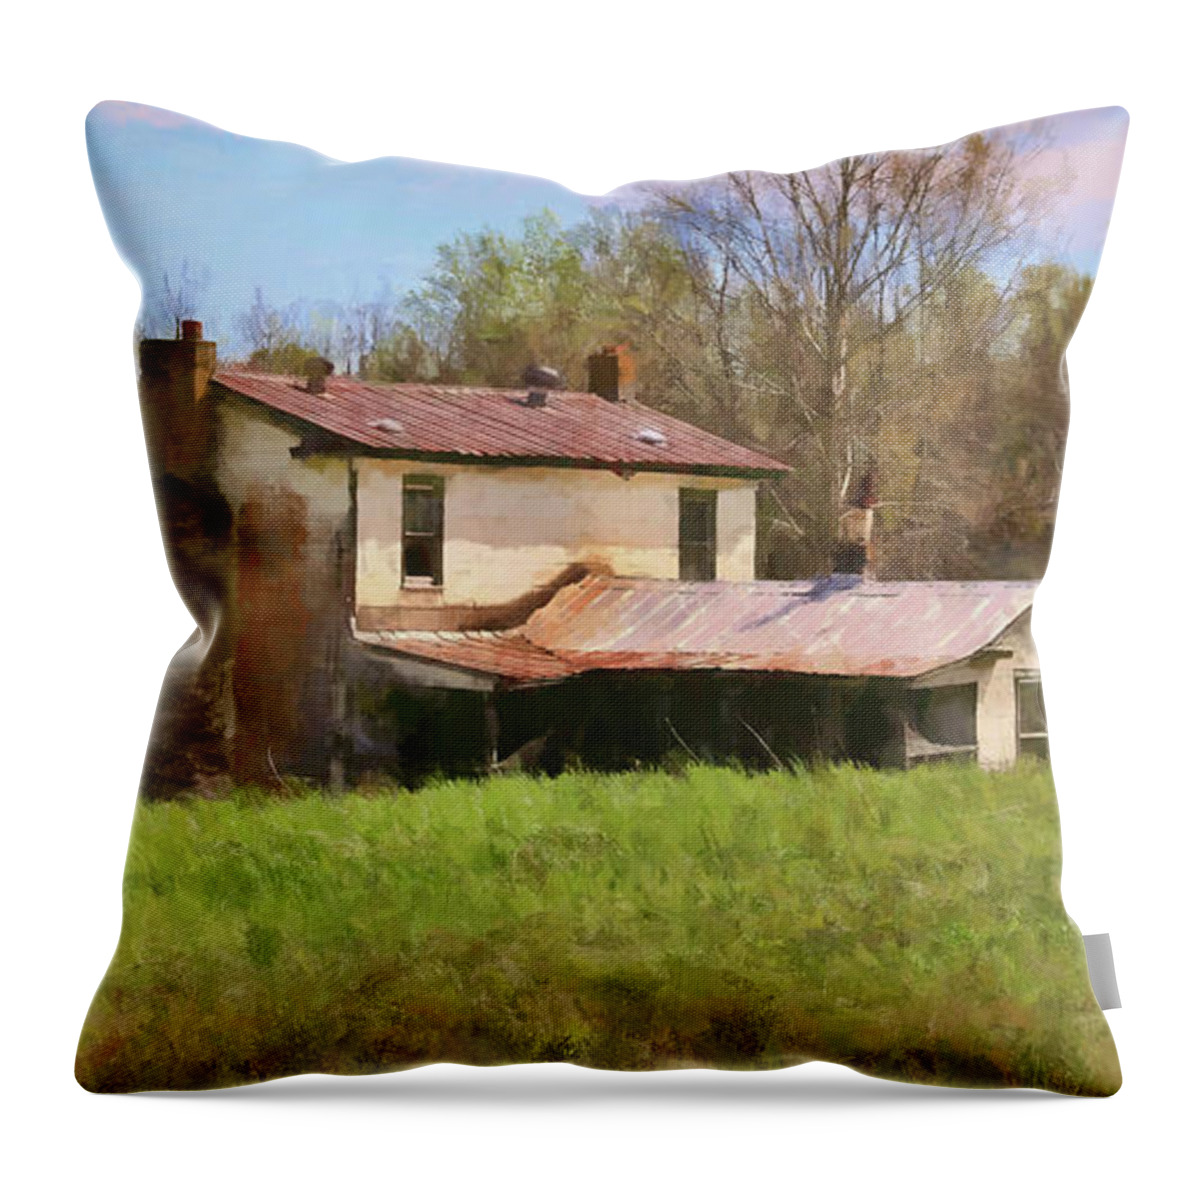 House Throw Pillow featuring the photograph Past Her Prime by Ola Allen